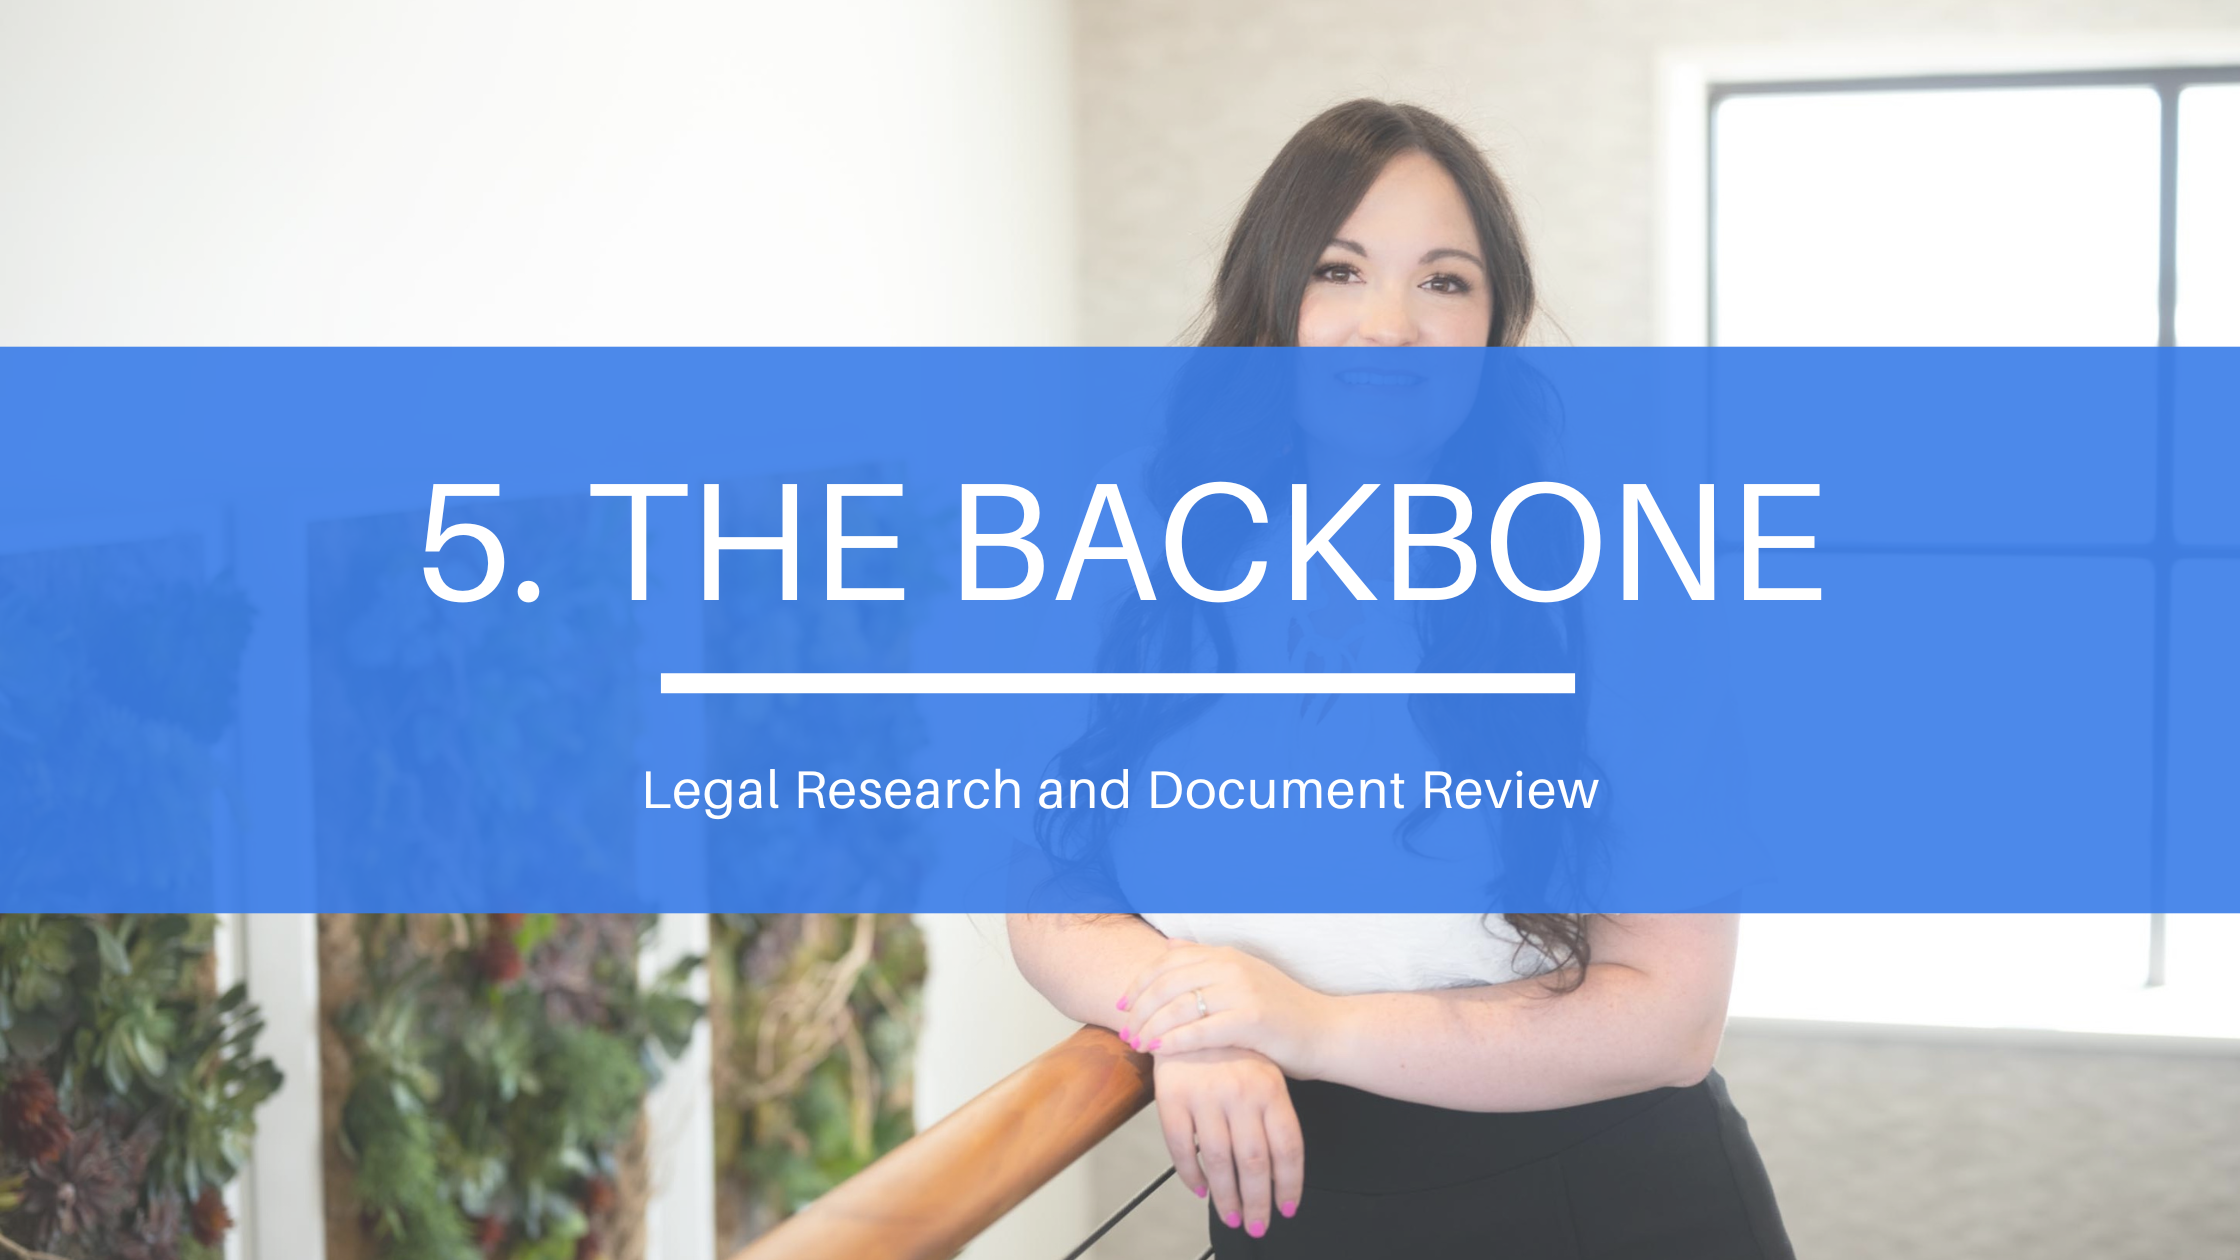 Legal research and document review